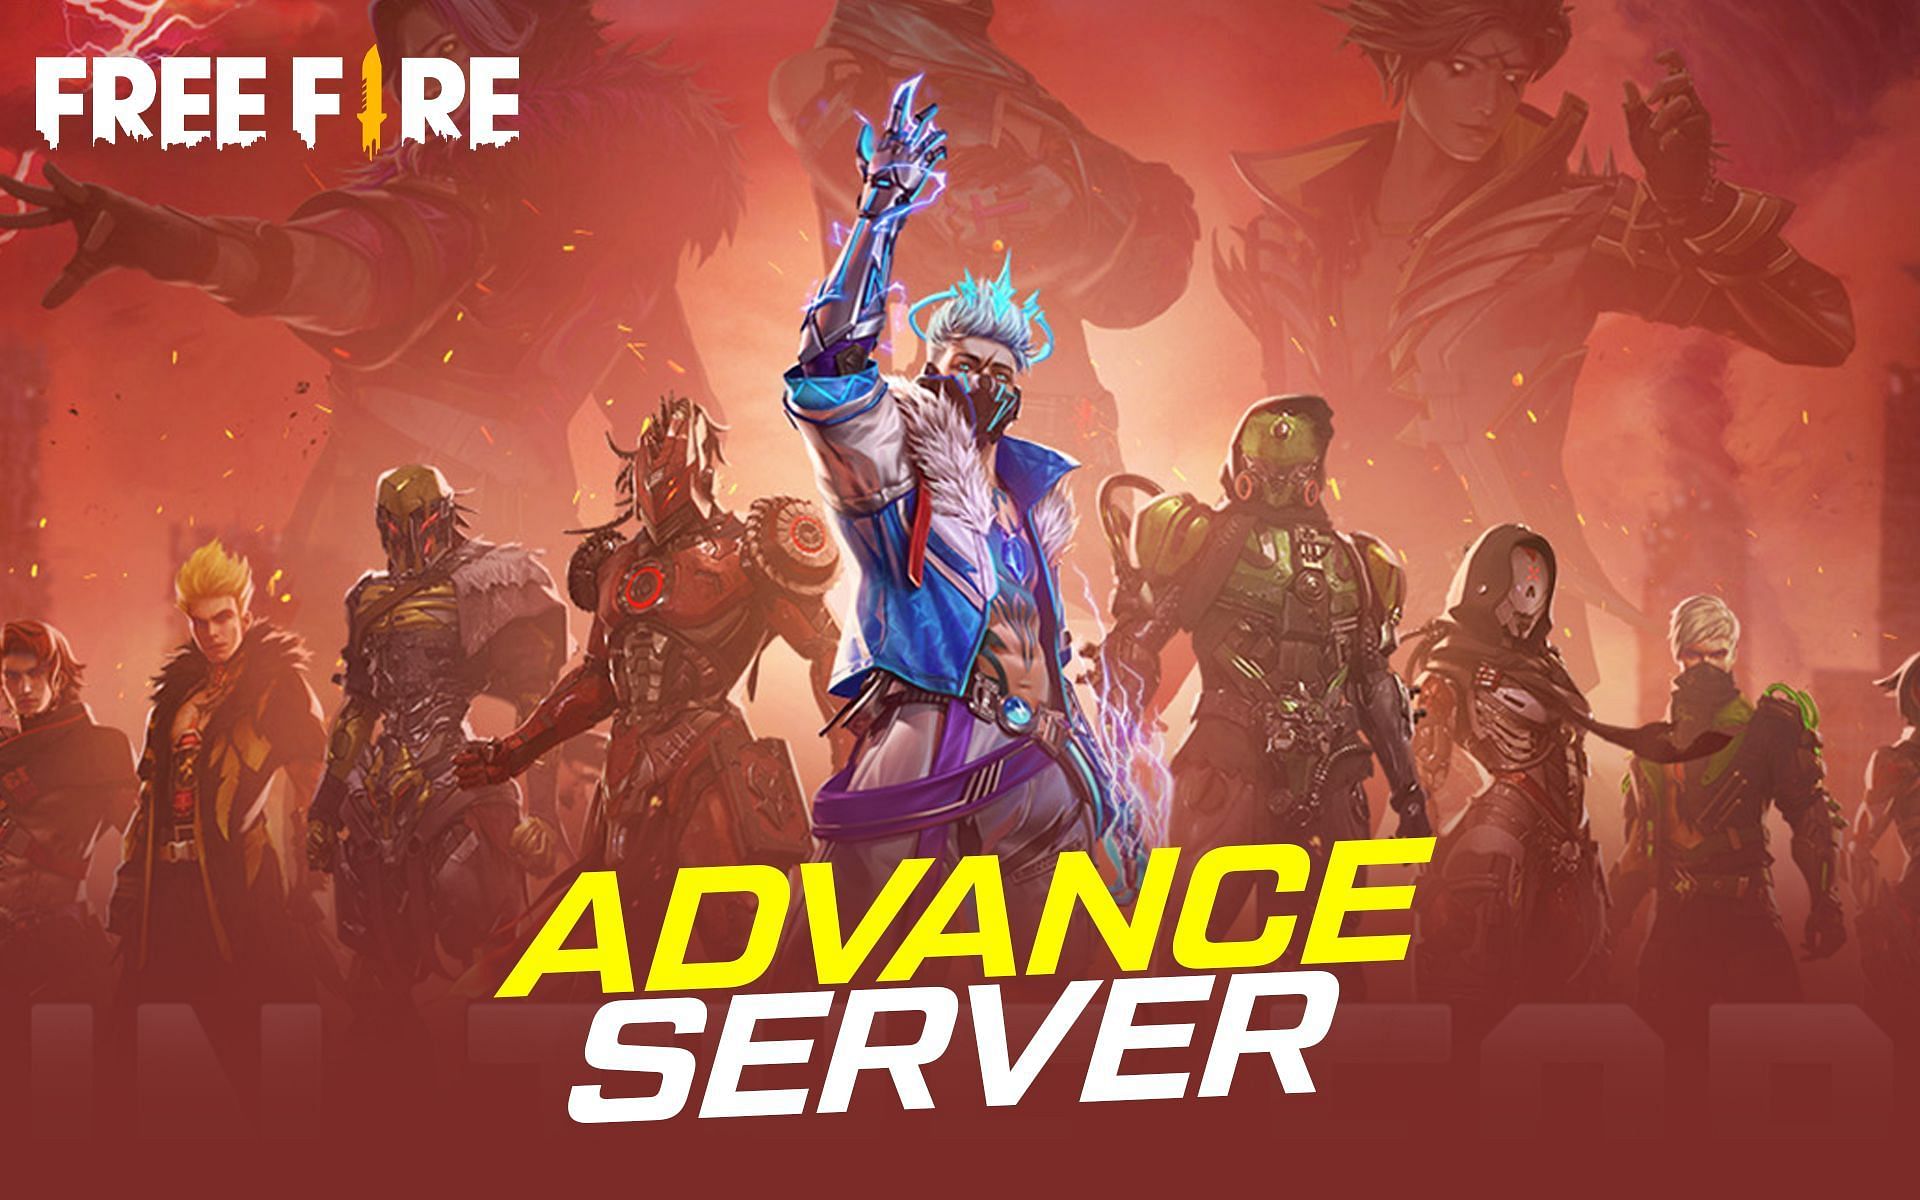 How to activate Free Fire Advance Server on Android in 2022